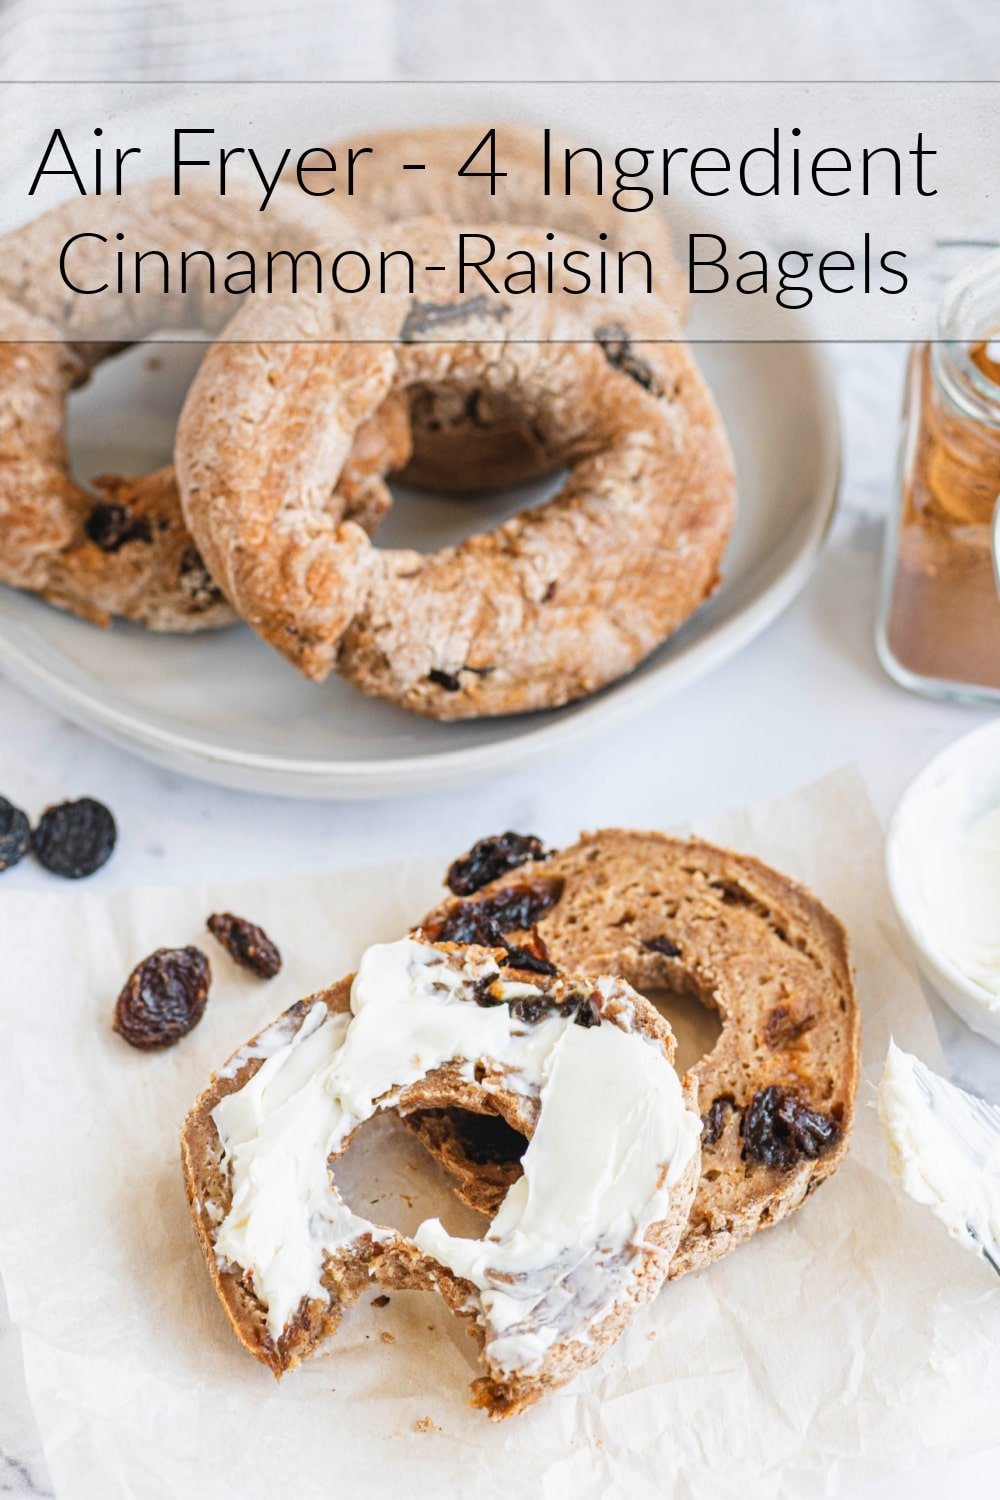 These Air Fryer 4-Ingredient Cinnamon-Raisin Bagels are your new way to conquer breakfast in a hurry. via @cmpollak1